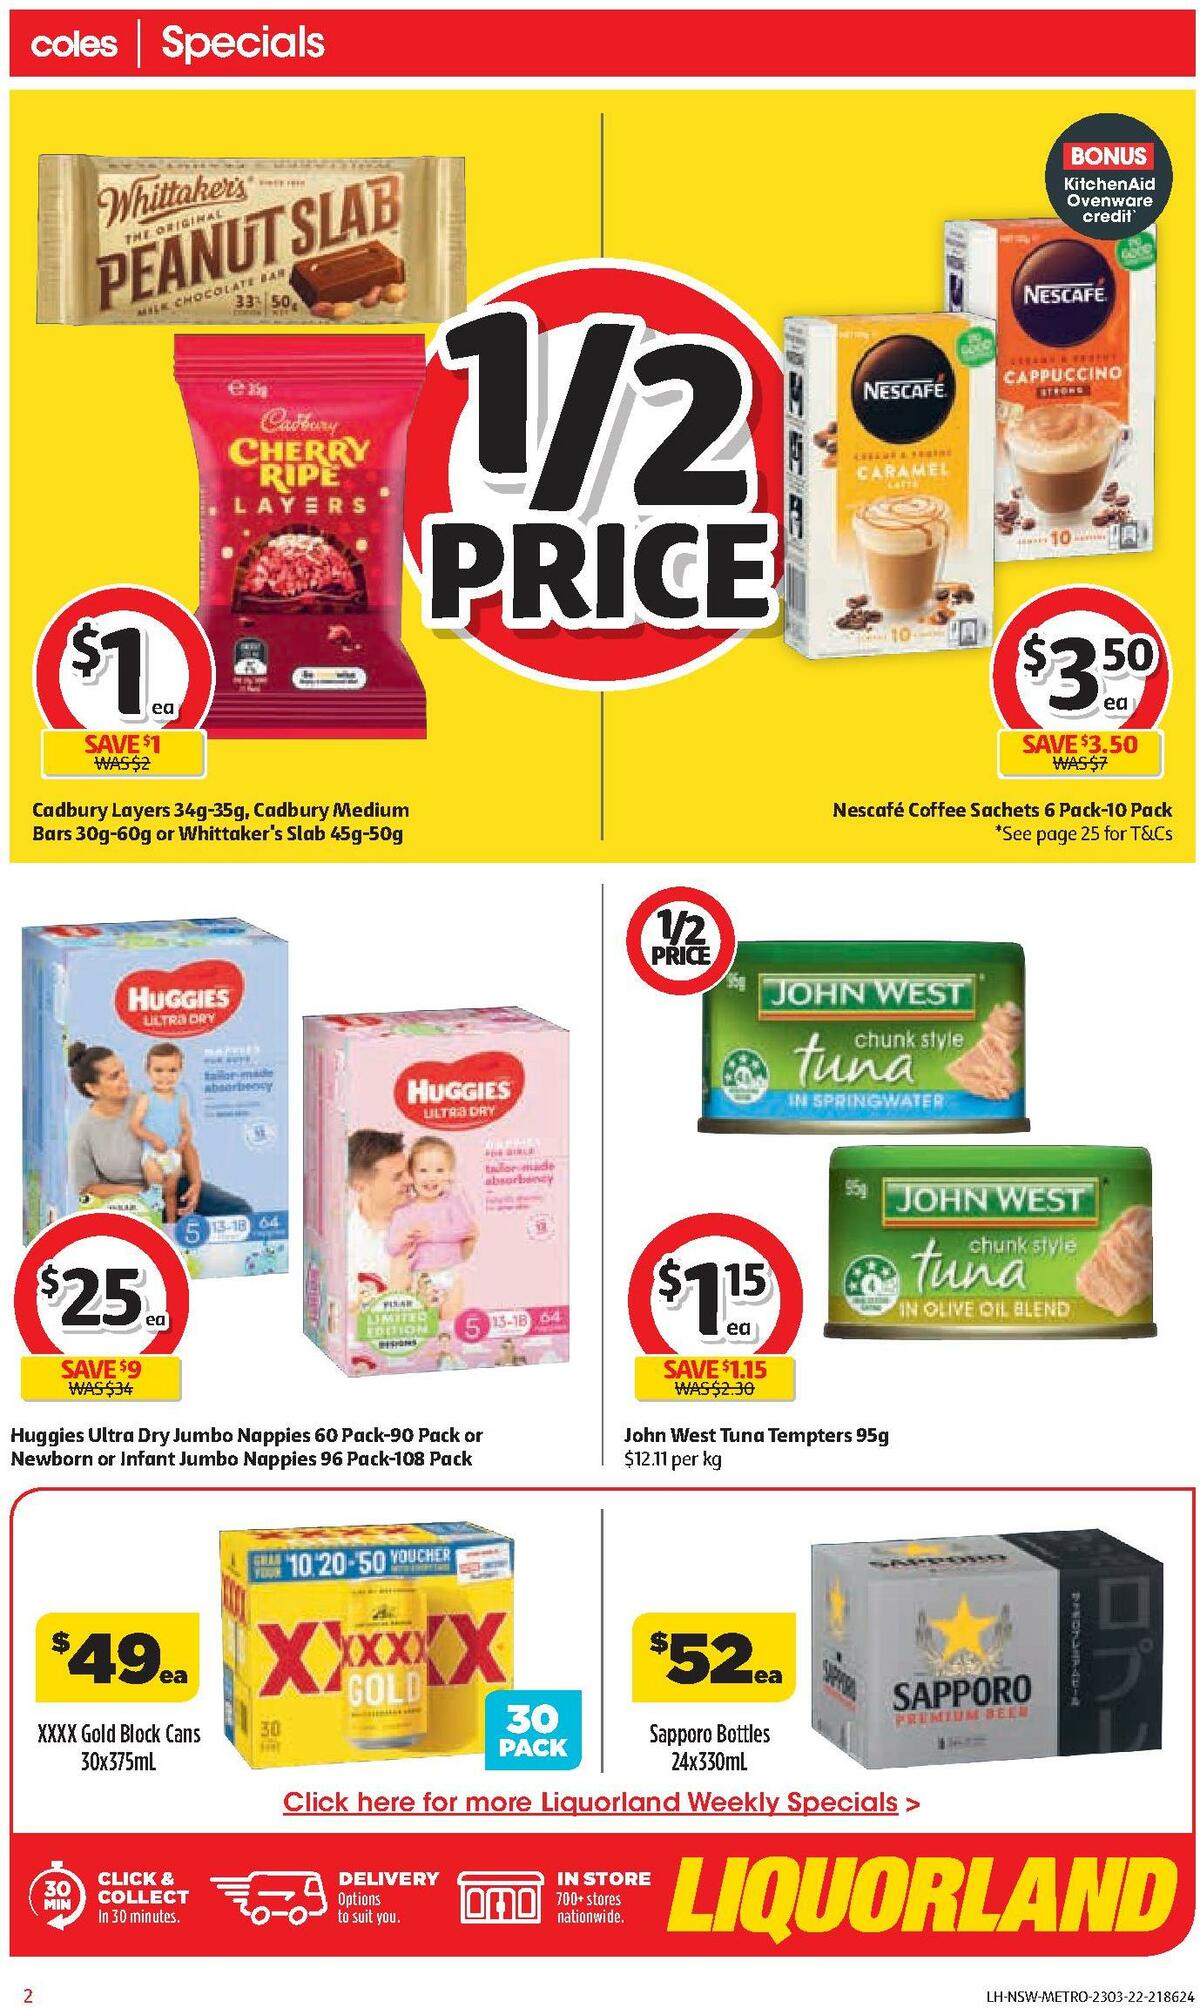 Coles Catalogues from 23 March